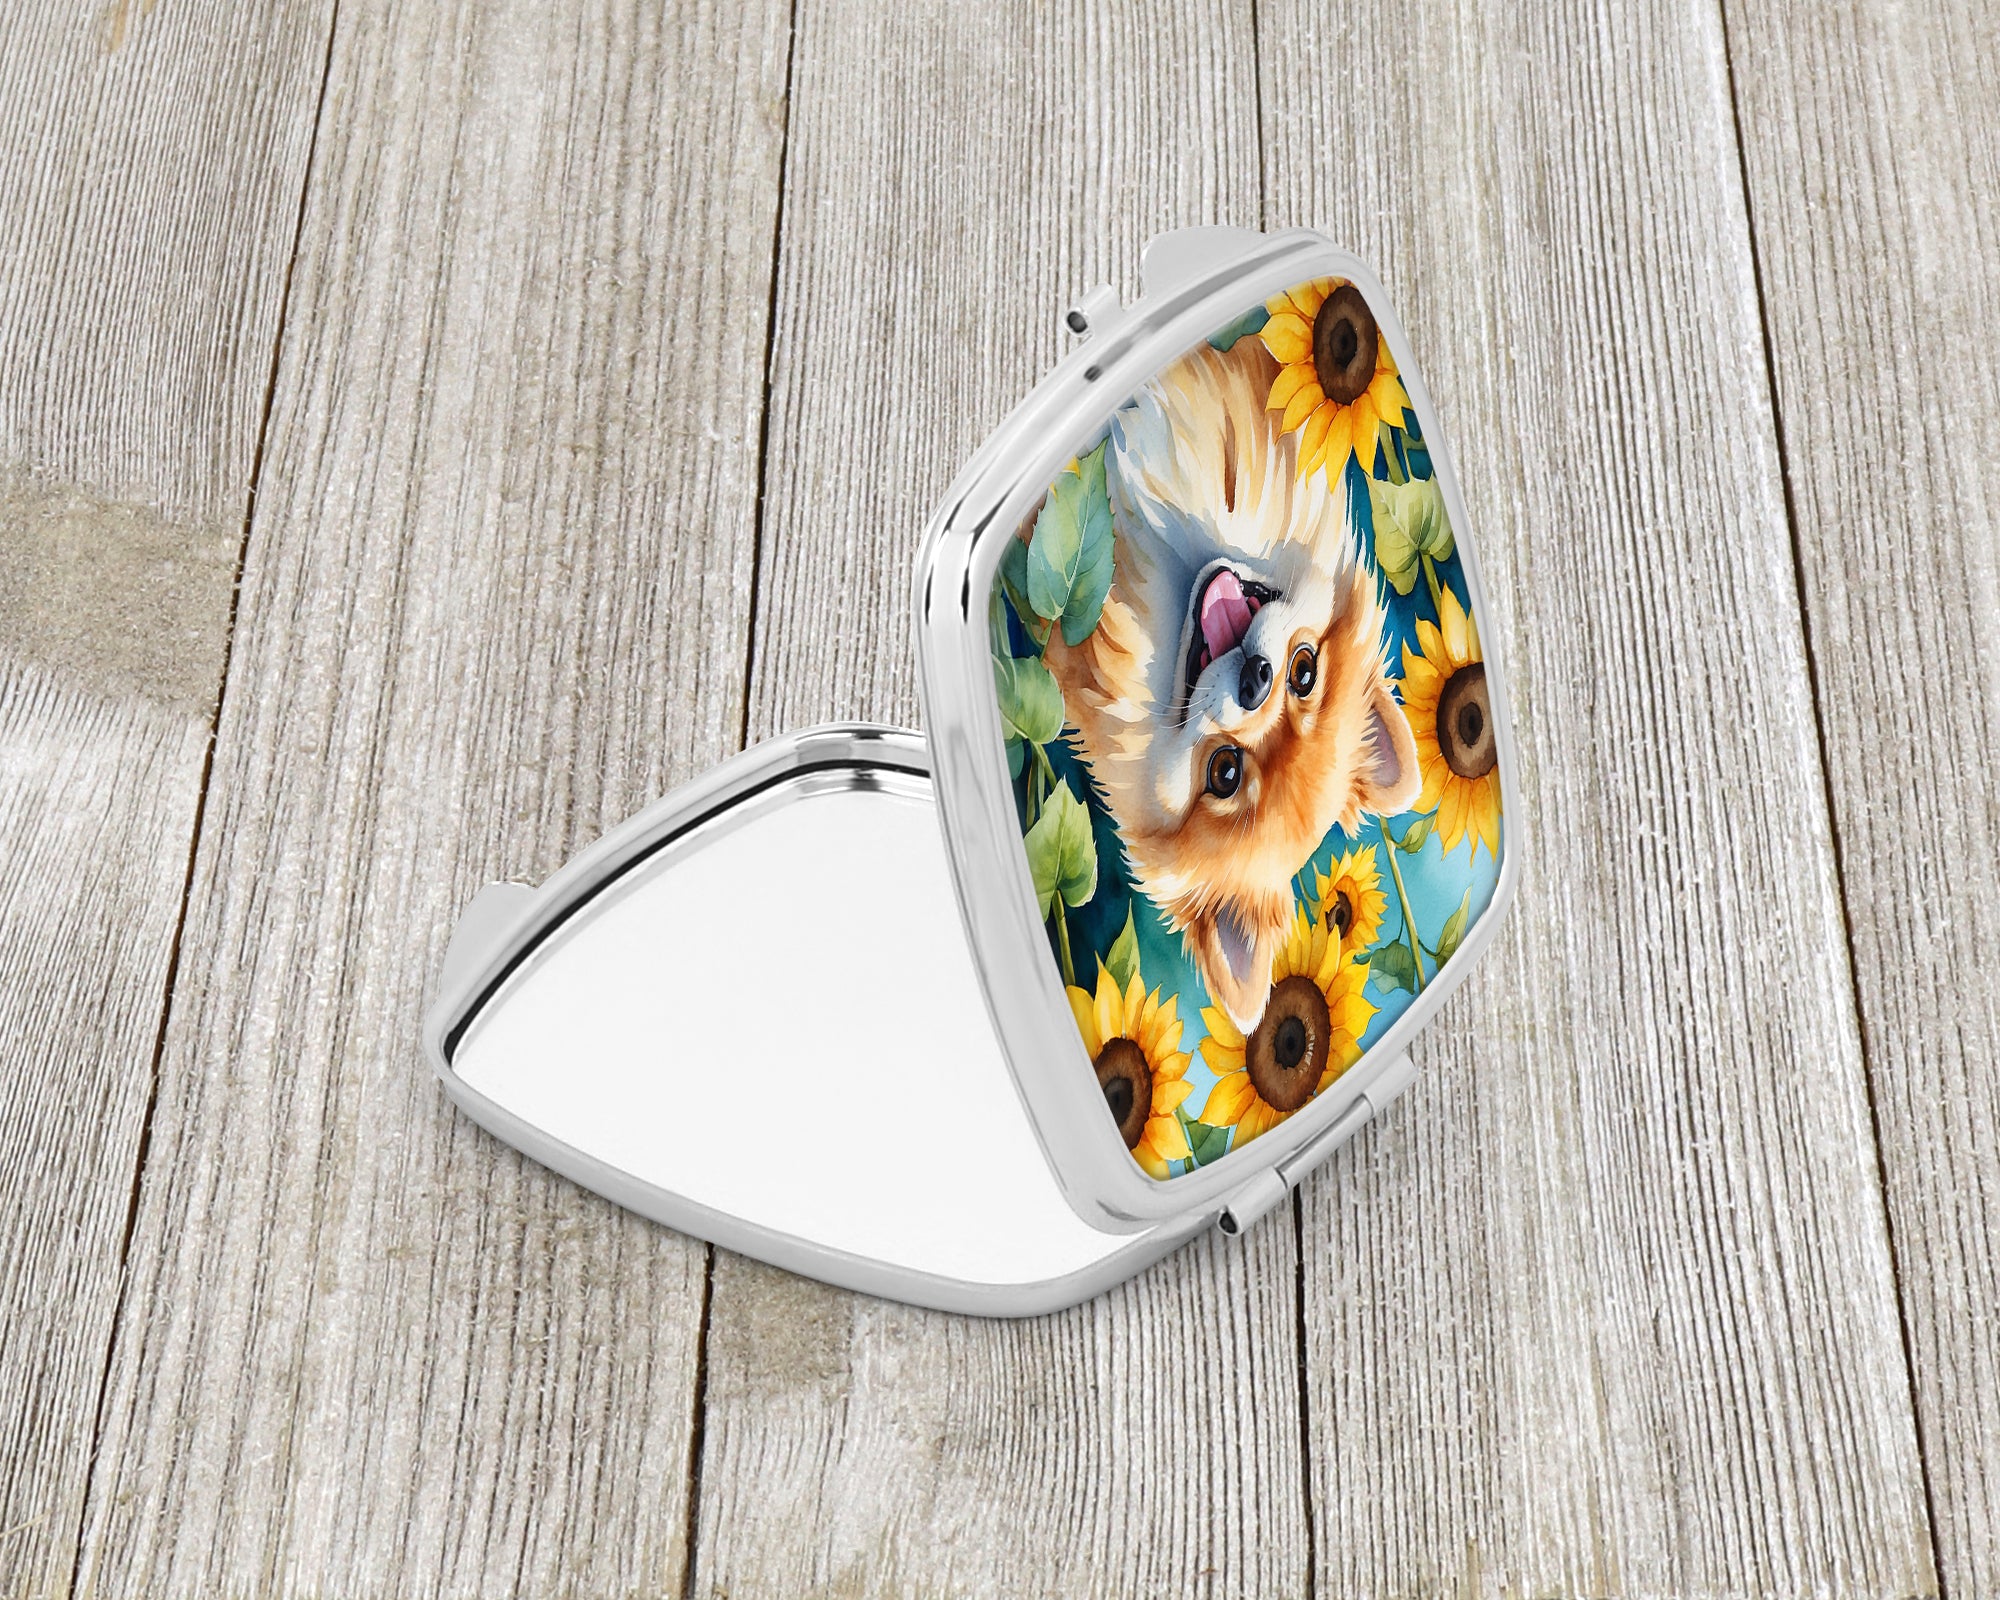 Buy this Pomeranian in Sunflowers Compact Mirror